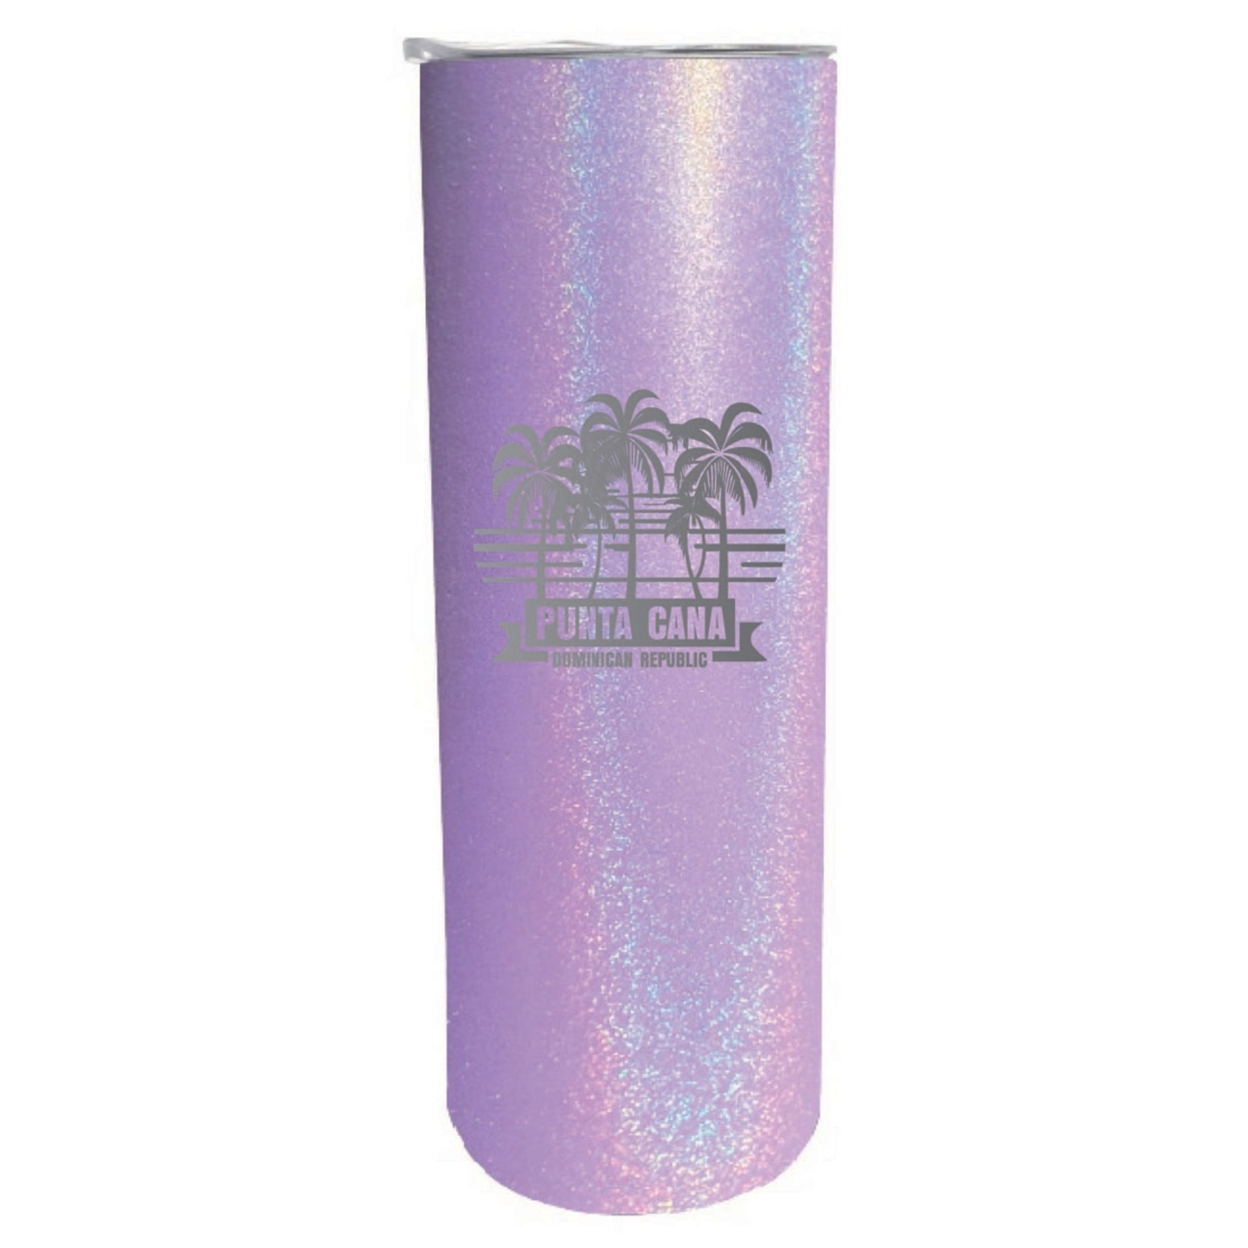 Punta Cana Dominican Republic Souvenir 20 Oz Insulated Stainless Steel Skinny Tumbler Etched - Rainbow Glitter Purple, PALM BEACH